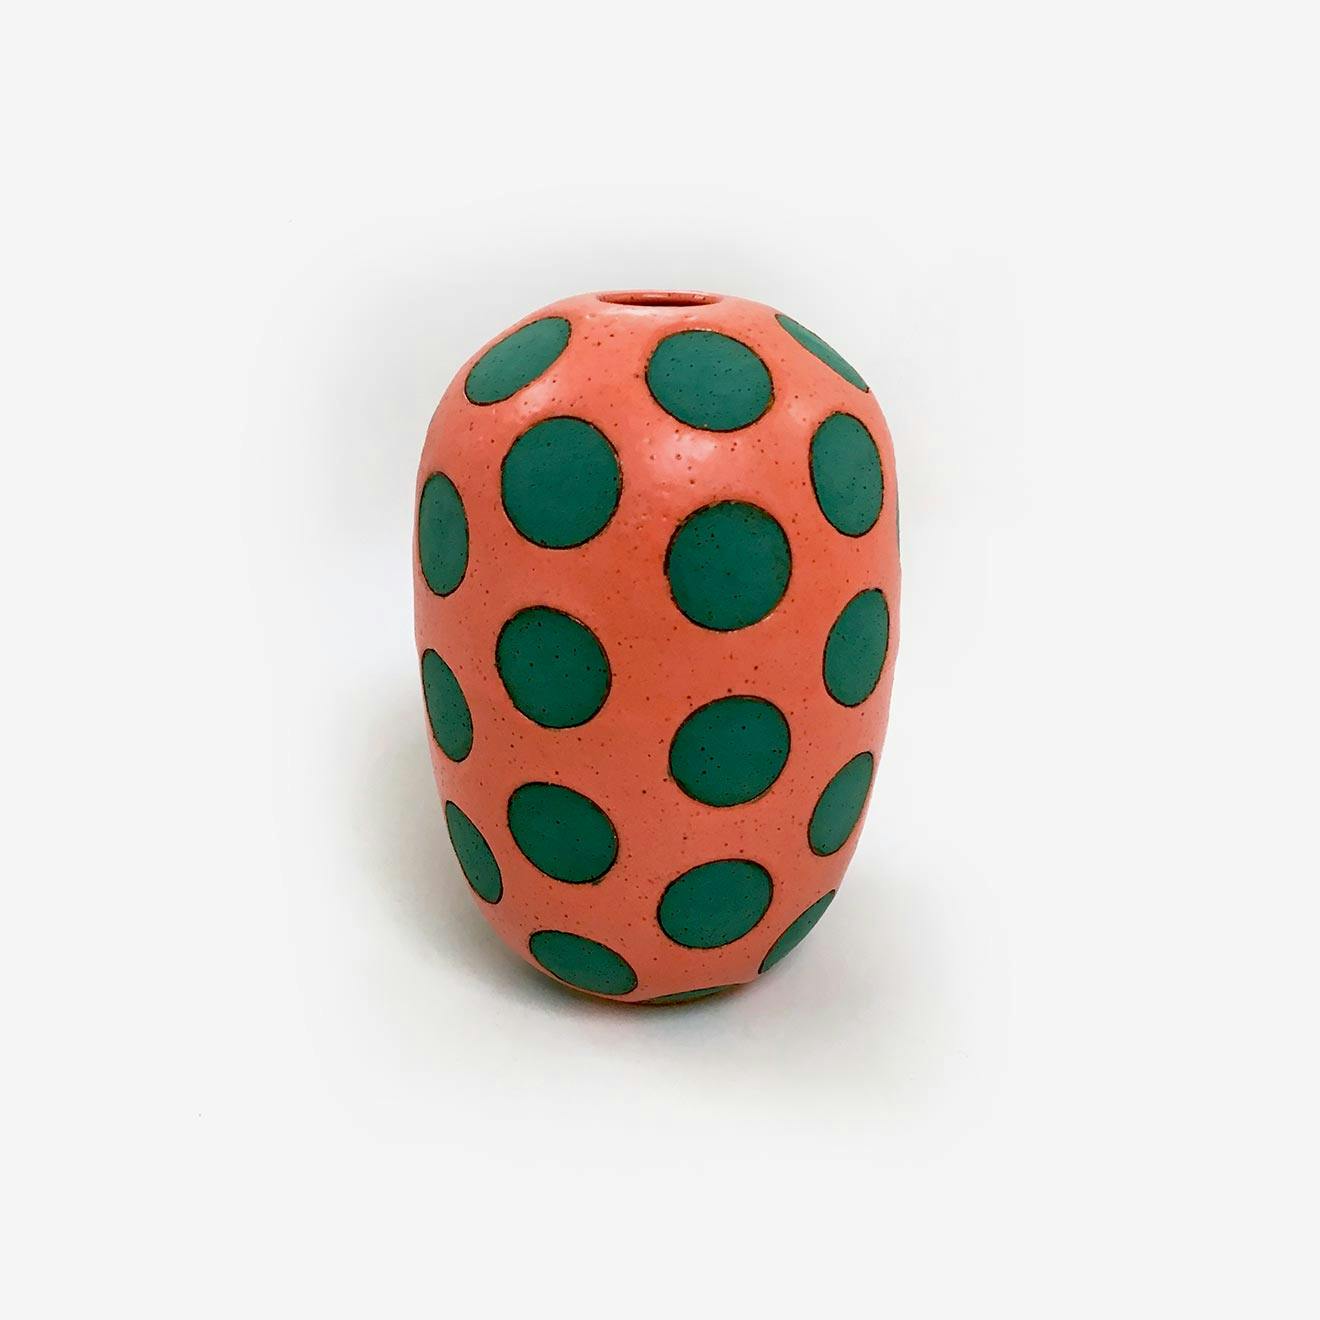 Sculpture by Matthew Ward titled "Coral and Green Polka Dot Vase".